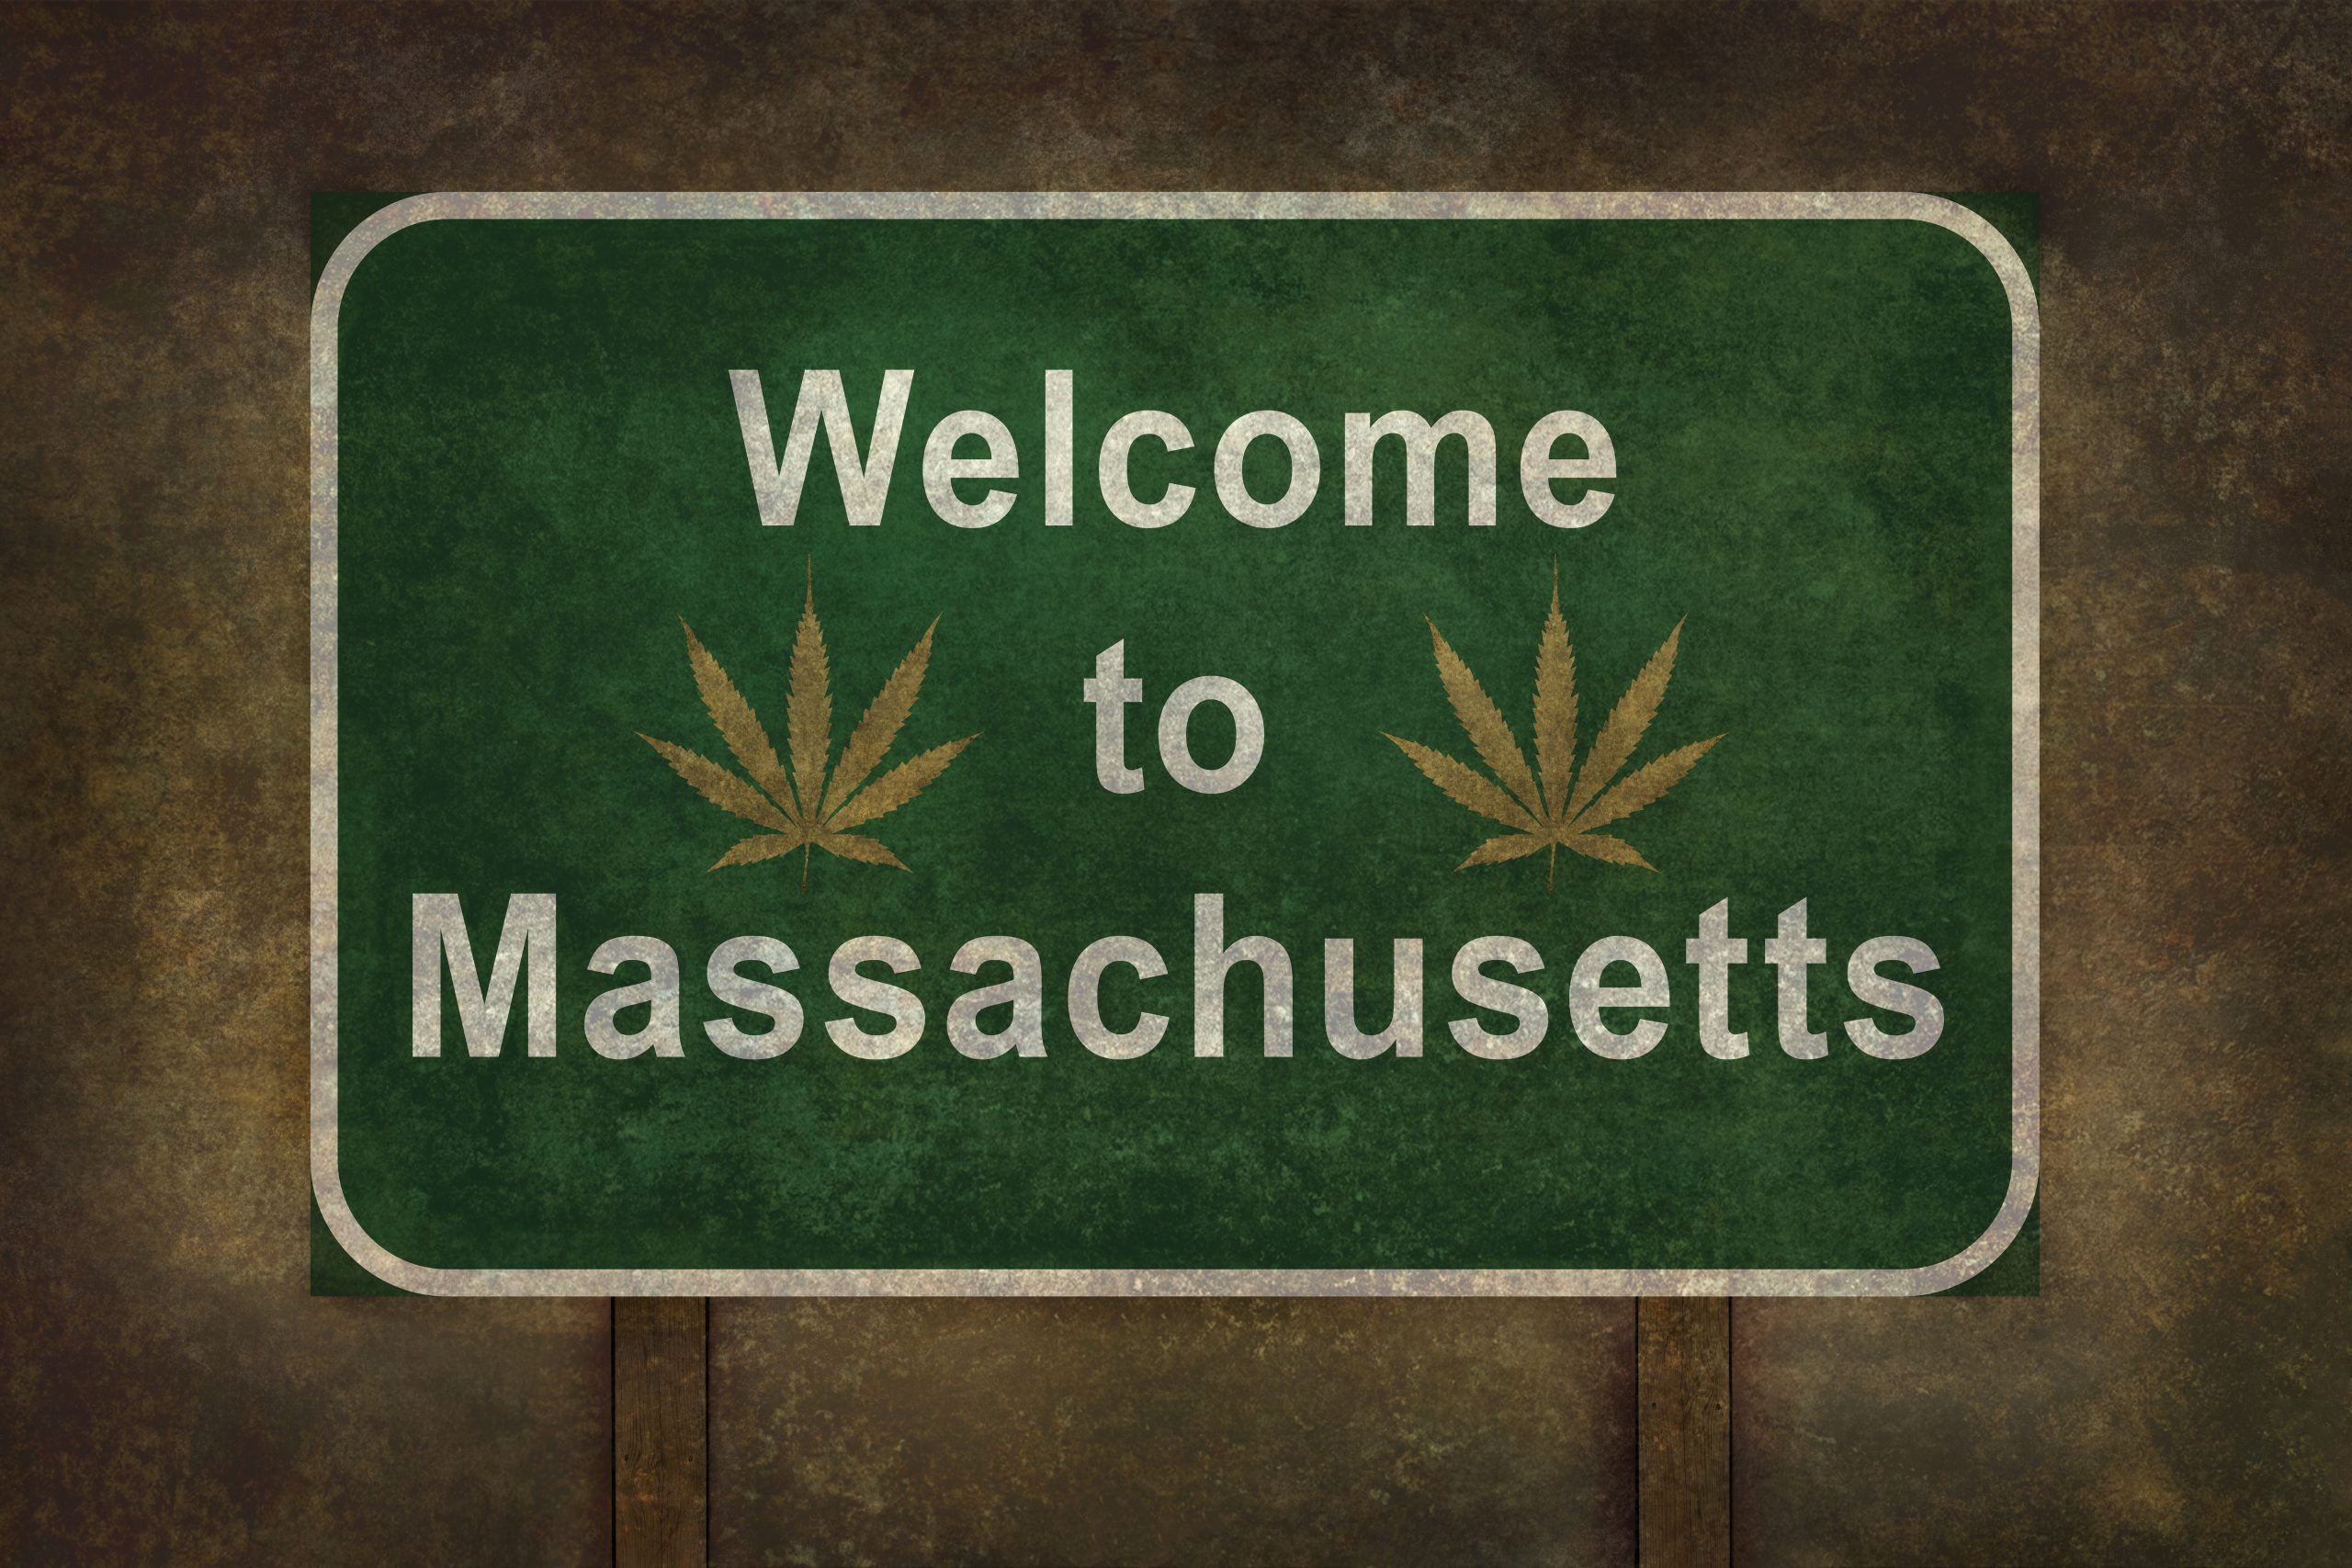 Welcome to Massachusetts with cannabis leaf road sign illustration, with distressed foreboding background